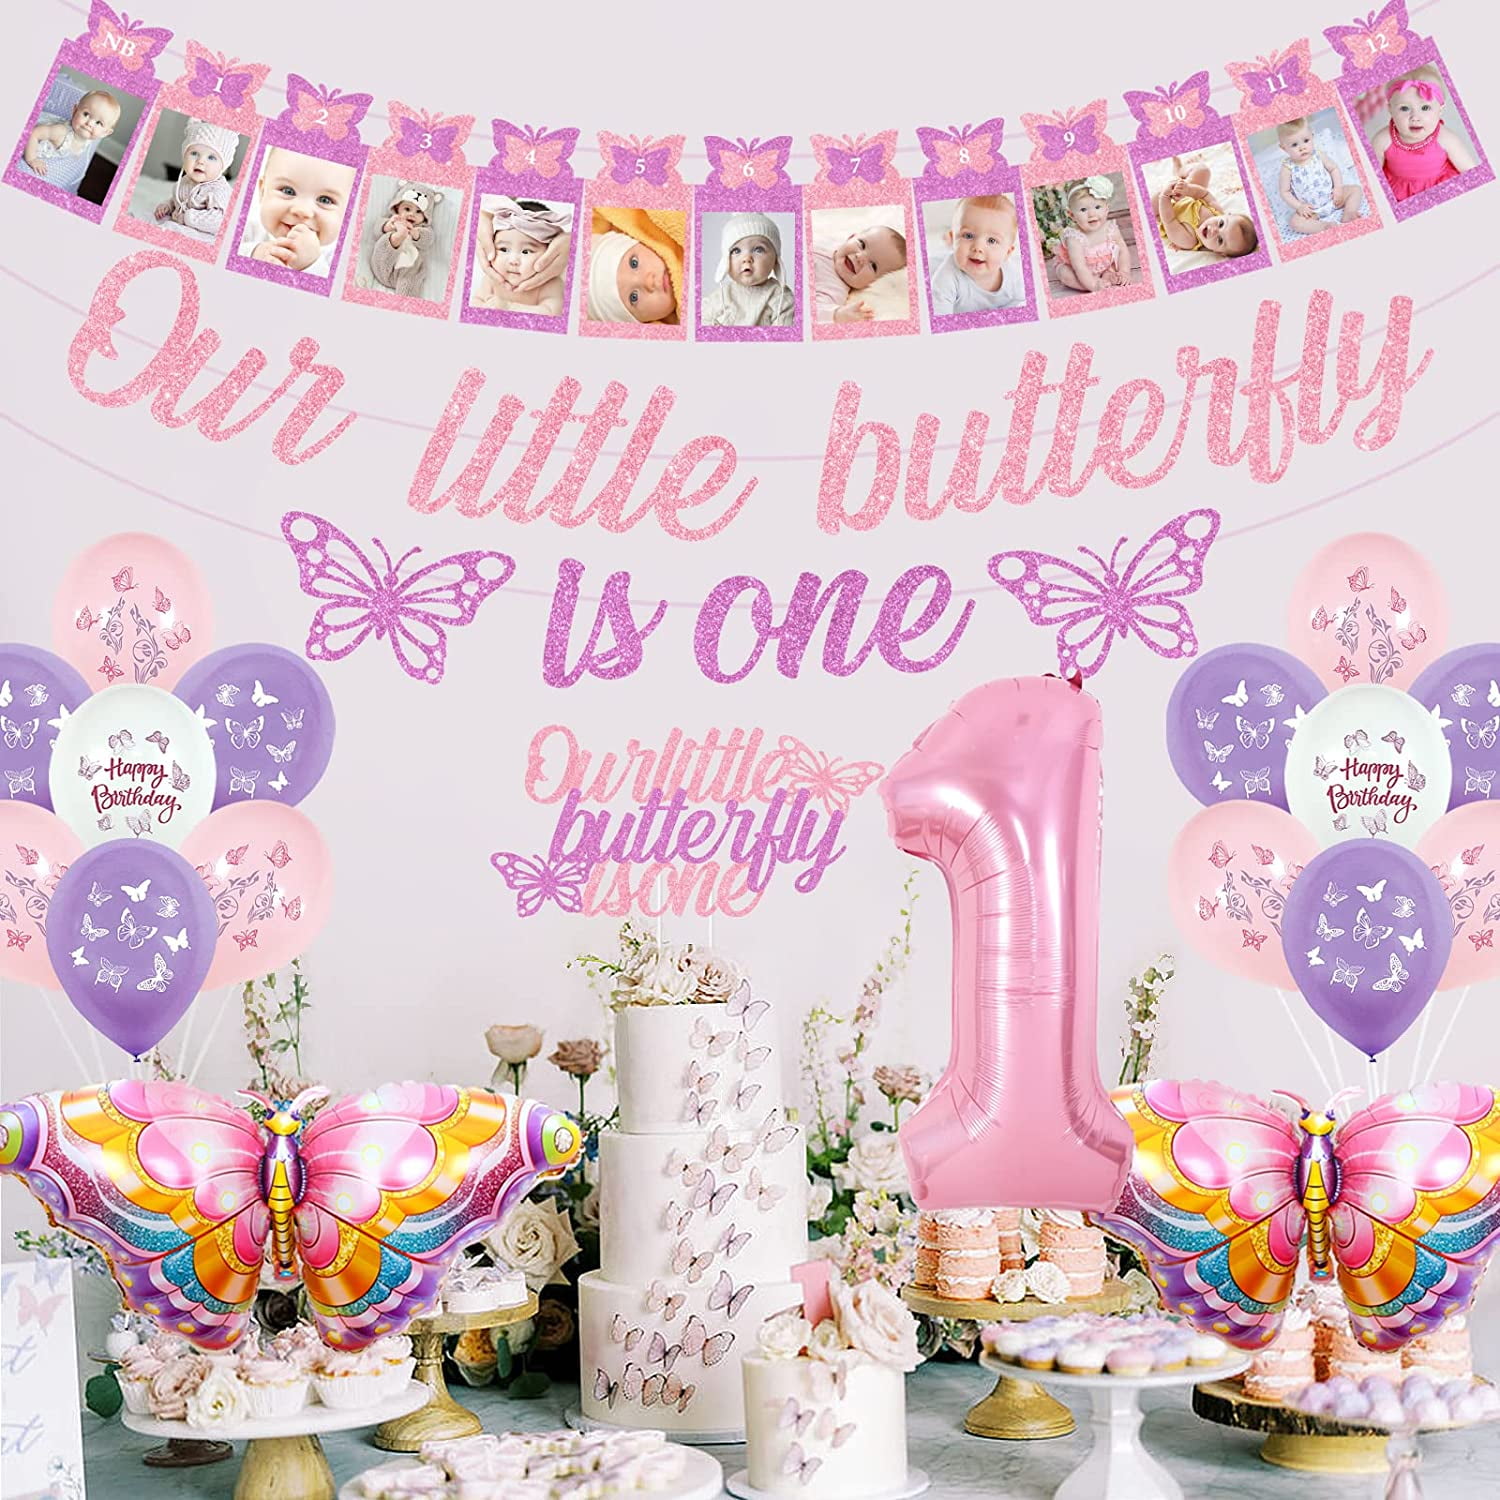 Butterfly 1st Birthday Decorations Pink Purple Girls, Our Little Butterfly is One Banner Butterfly Photo Banner Birthday Balloons Decor for Girls Butterfly Floral Theme First Birtdahy - Walmart.com